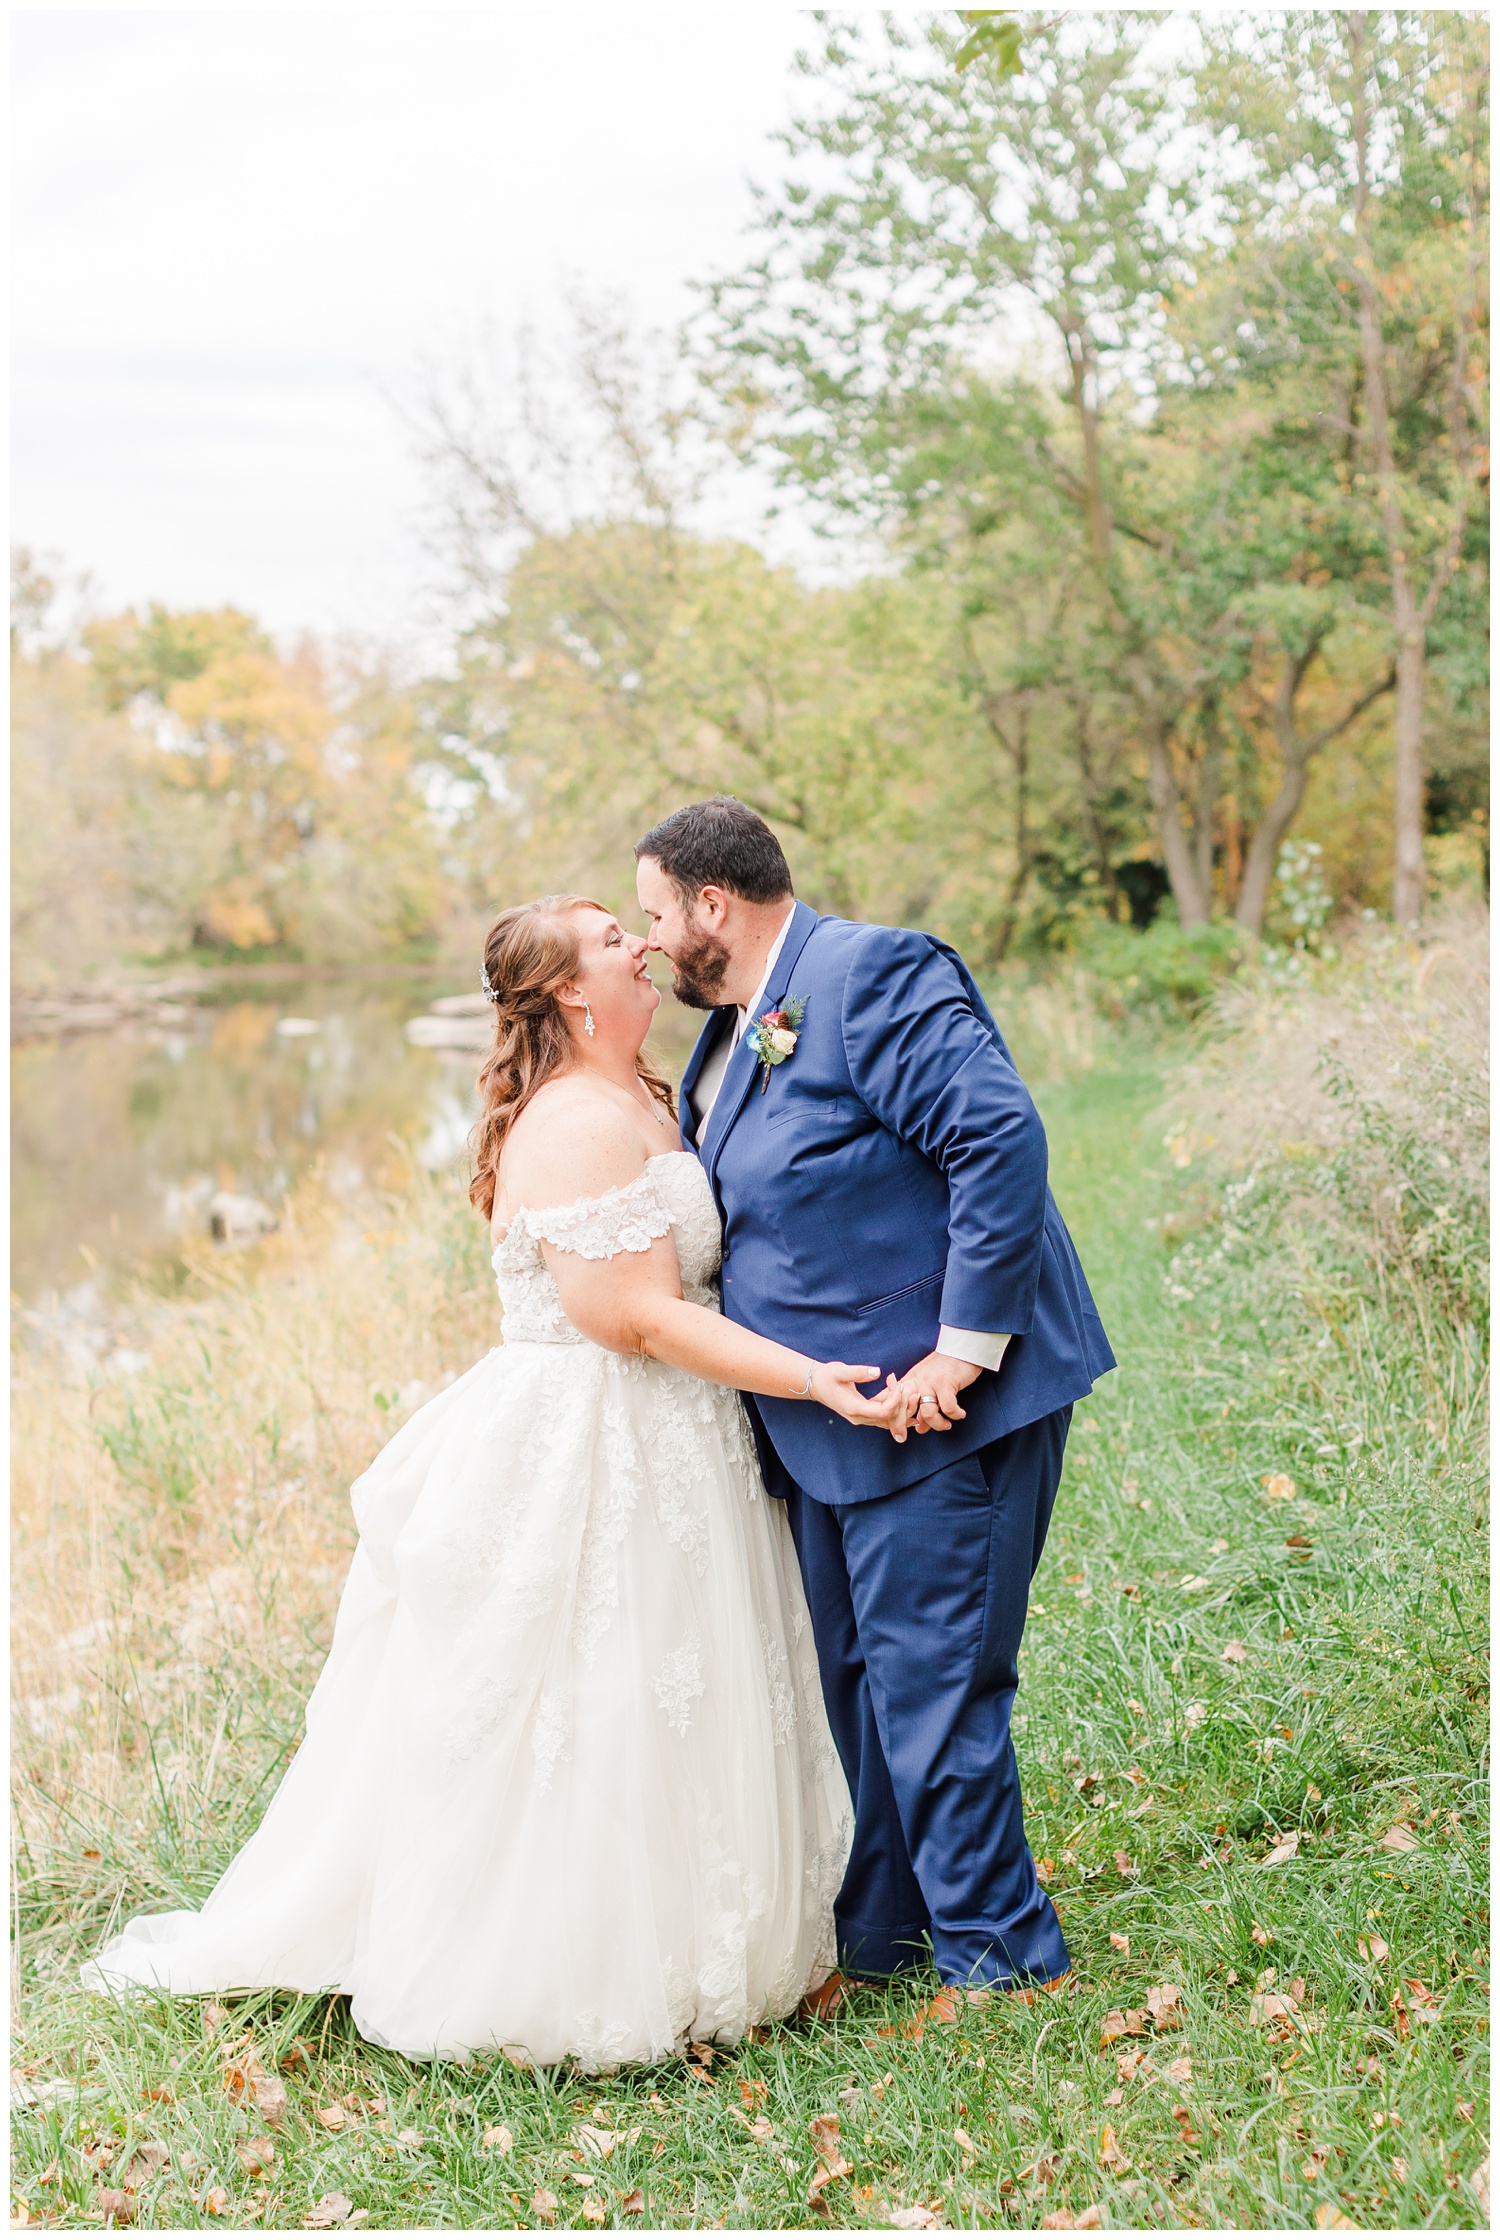 Bride and Groom dance along a river as a newly married couple | CB Studio